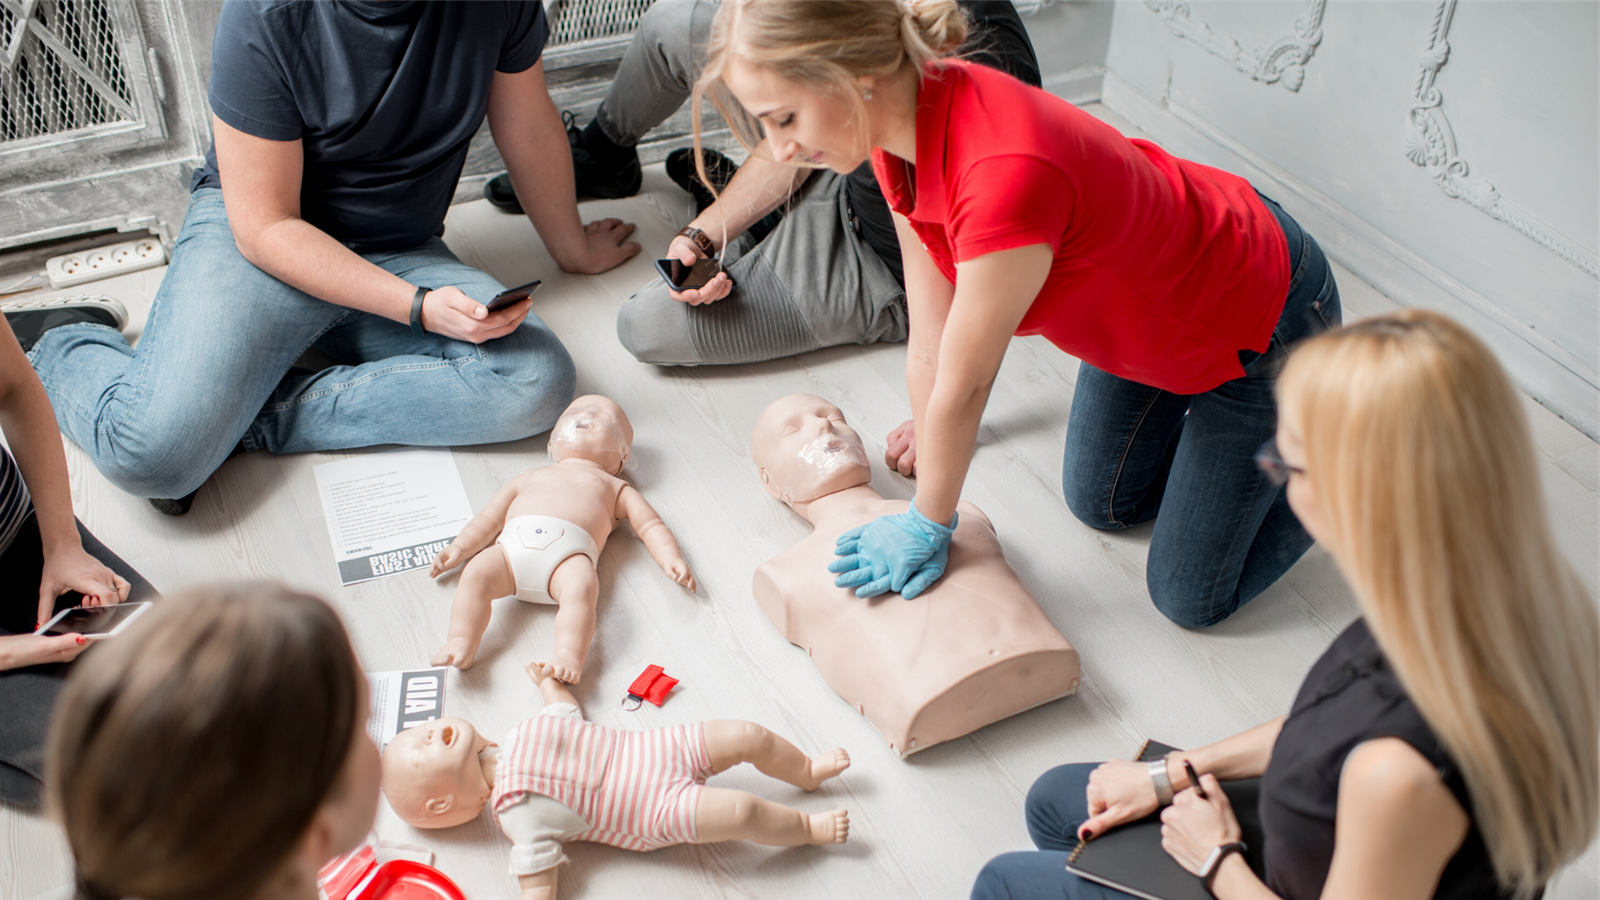 Students practice CPR on medical manikins